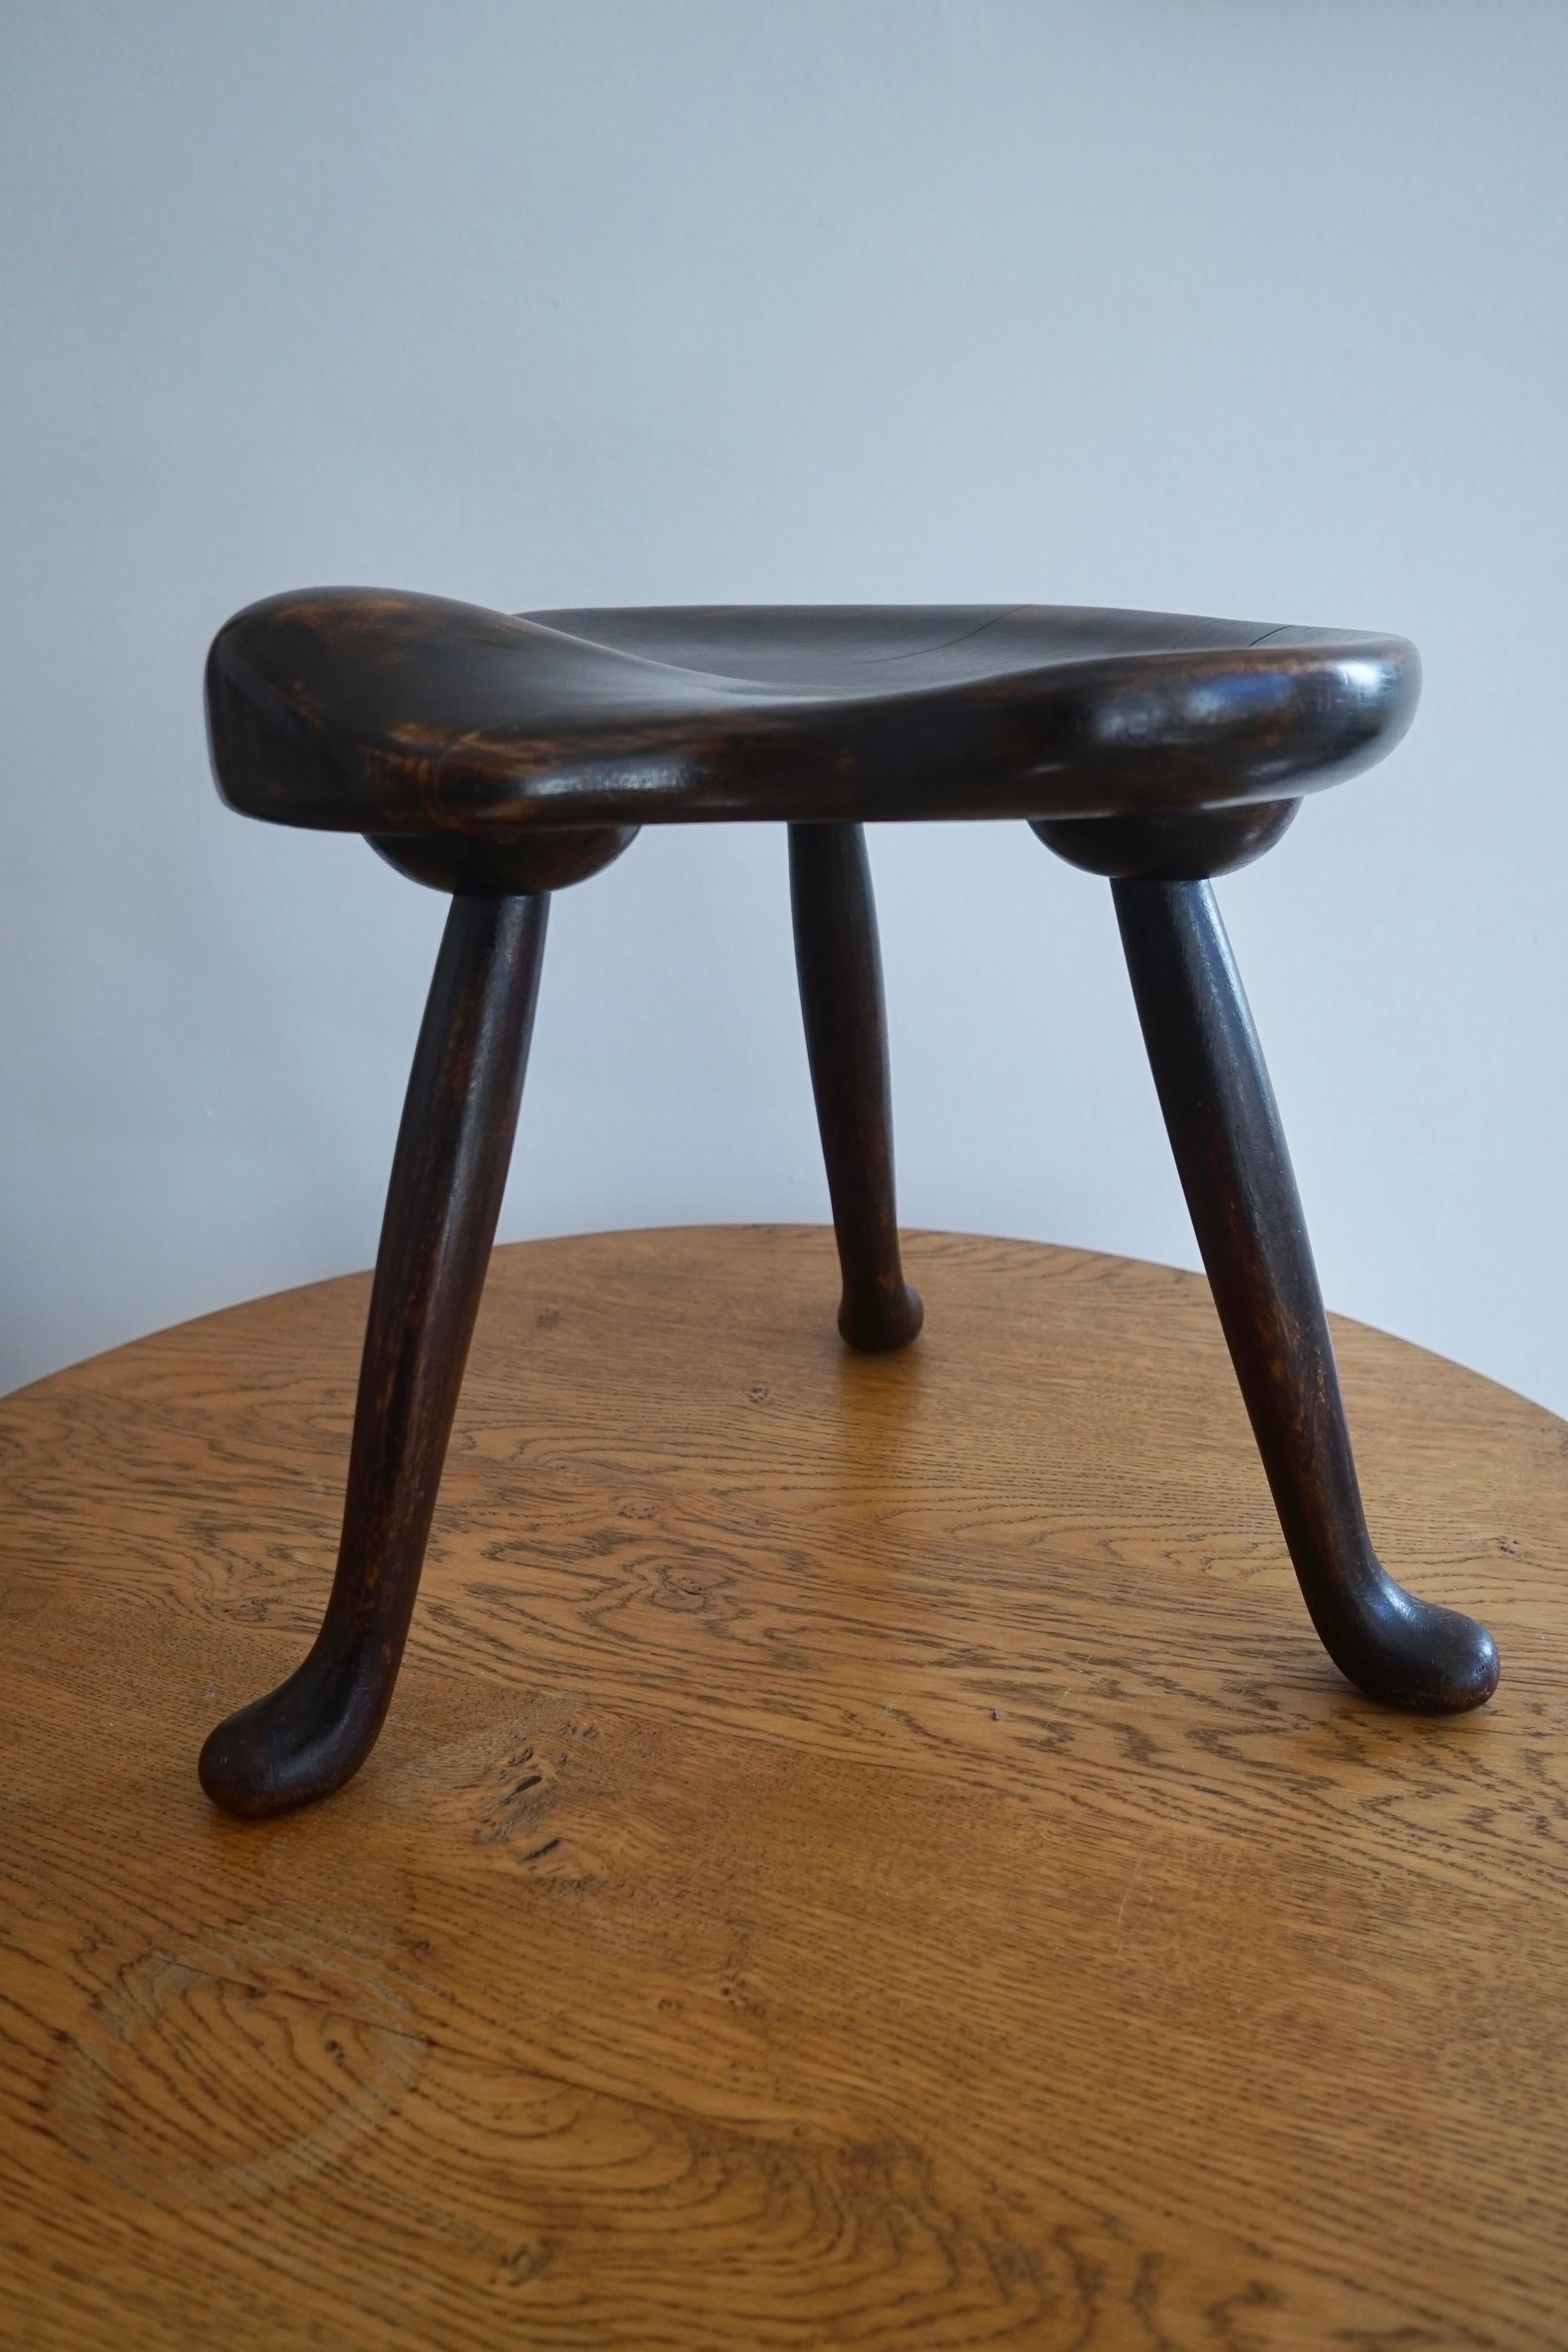 Rare Josef Frank stool in dark stained elm manufactured by Fritz Hansen in the 1940’s.
The stool is in good condition with signs of use and is ready to be taken in use.

This stool is the perfect feature for any interior and fits many styles from